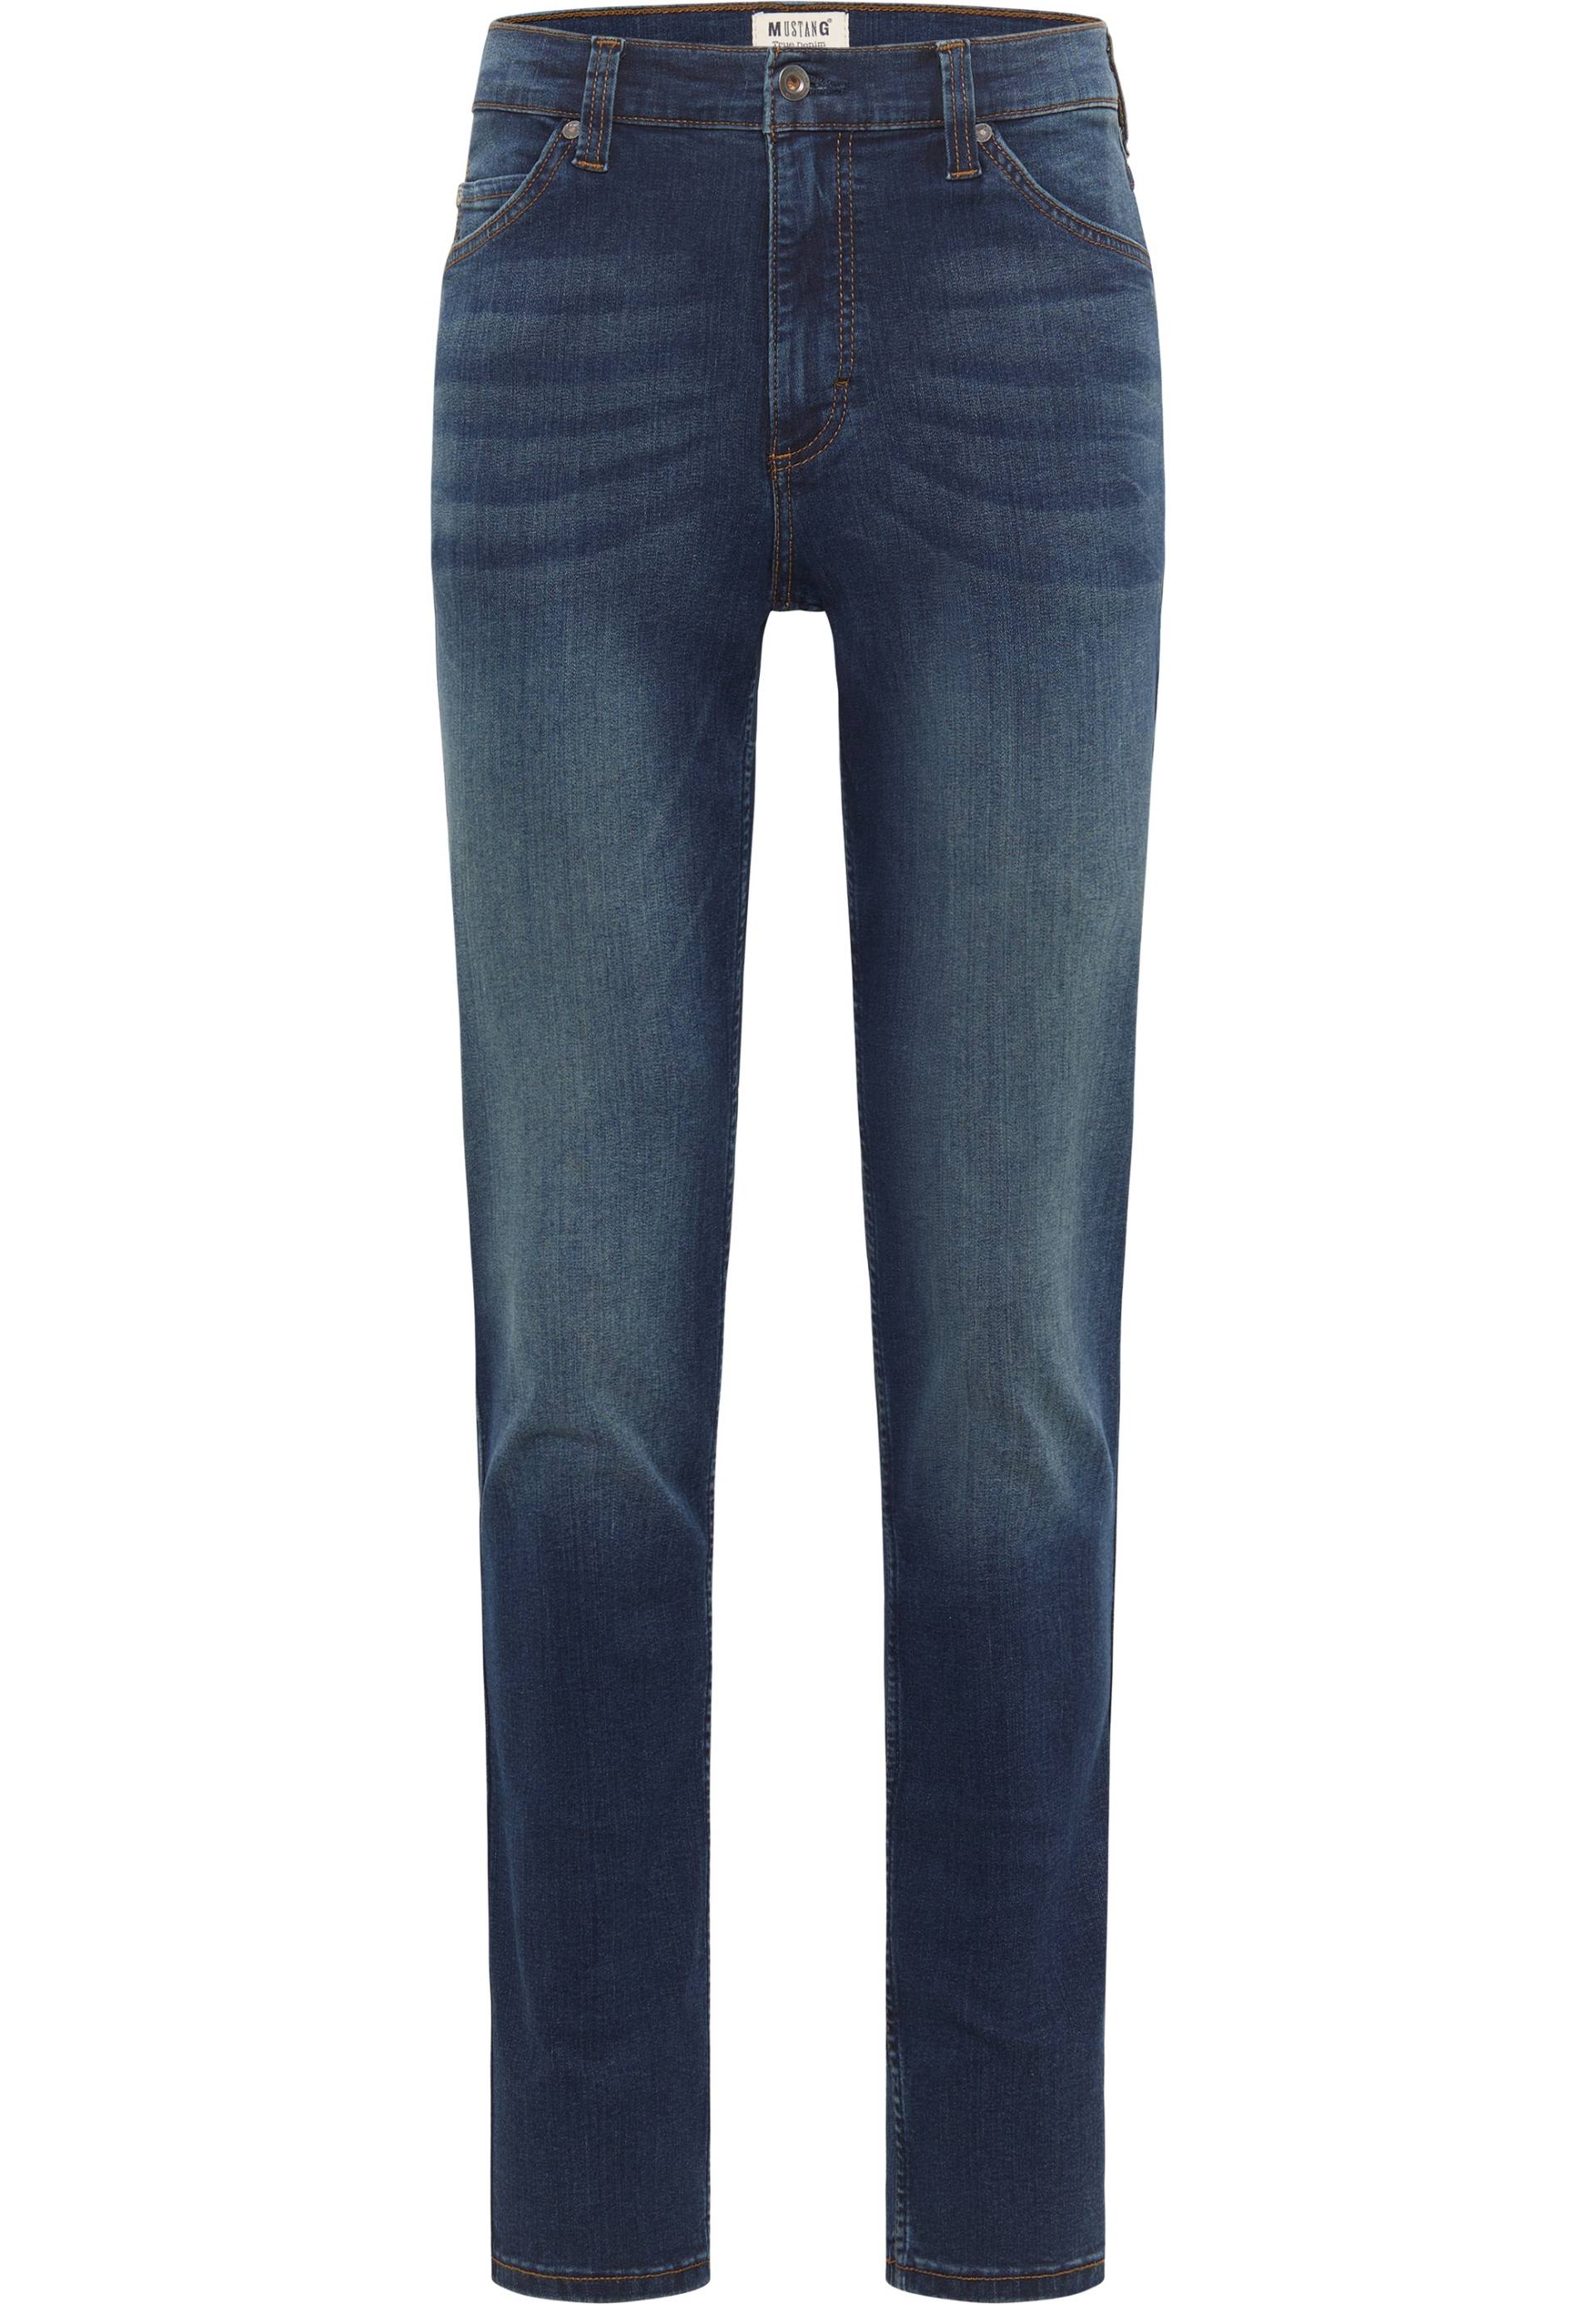 MUSTANG Tapered-fit-Jeans »Style Tramper Tapered« von mustang